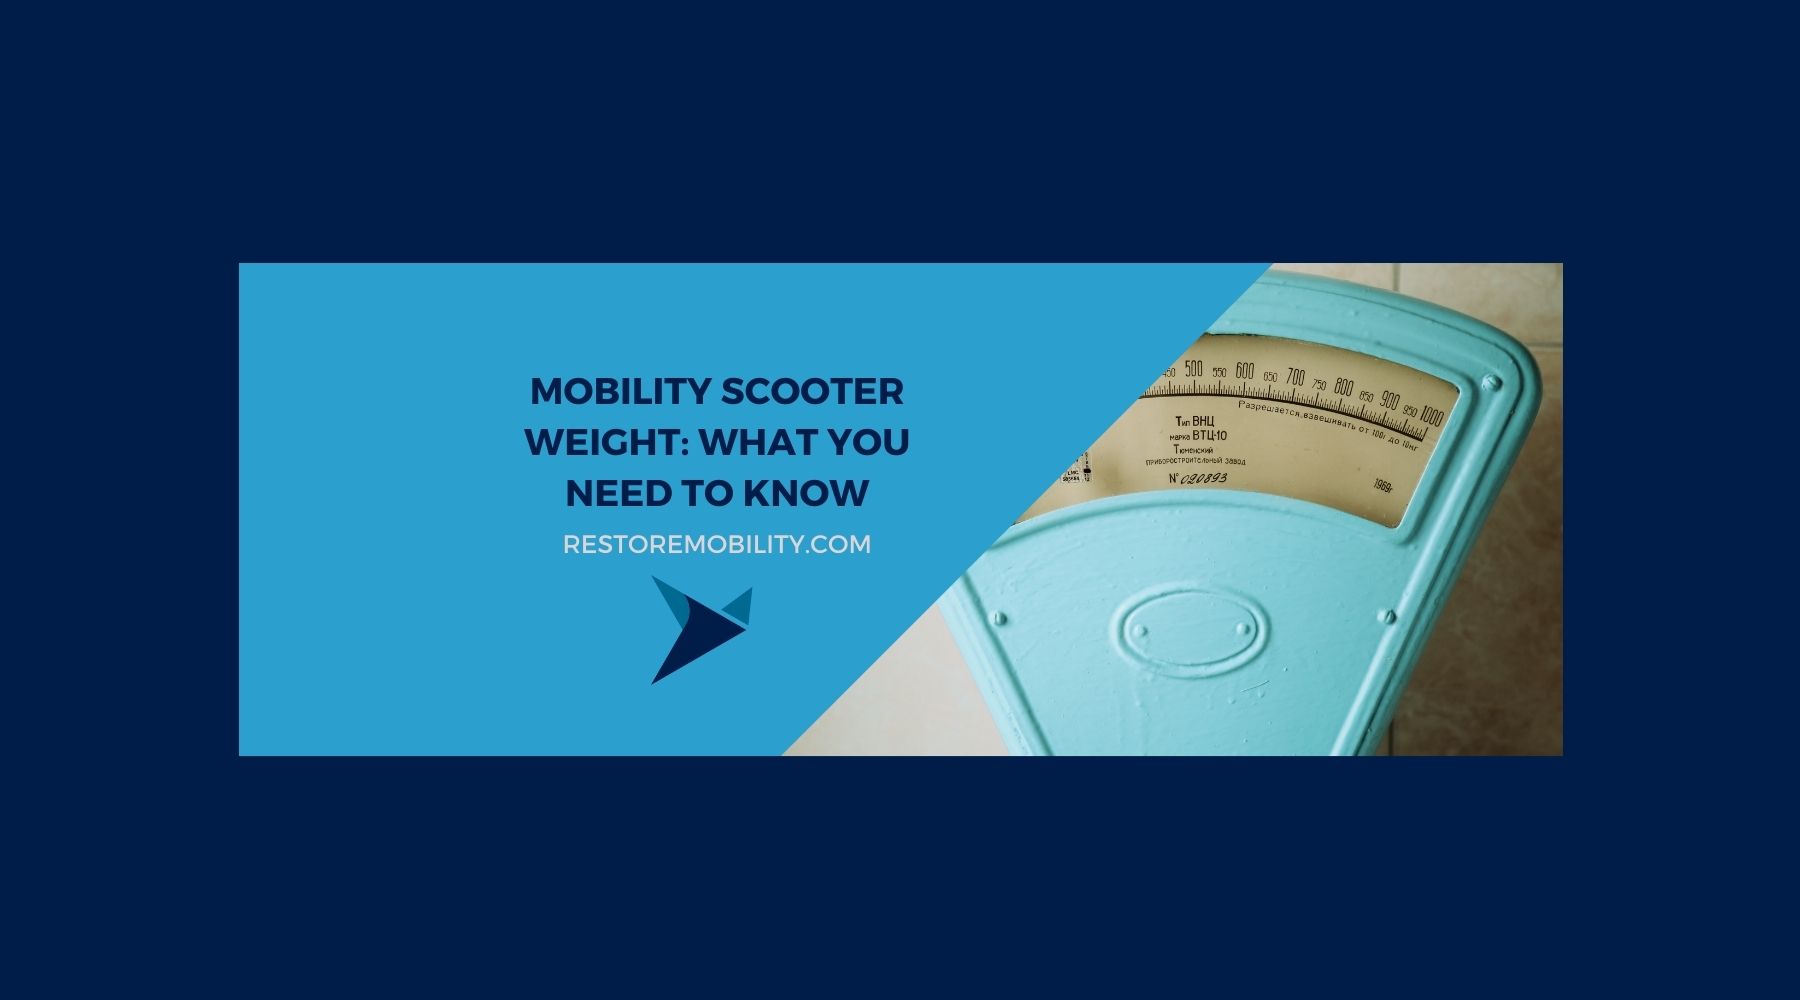 Mobility Scooter Weight: What You Need to Know